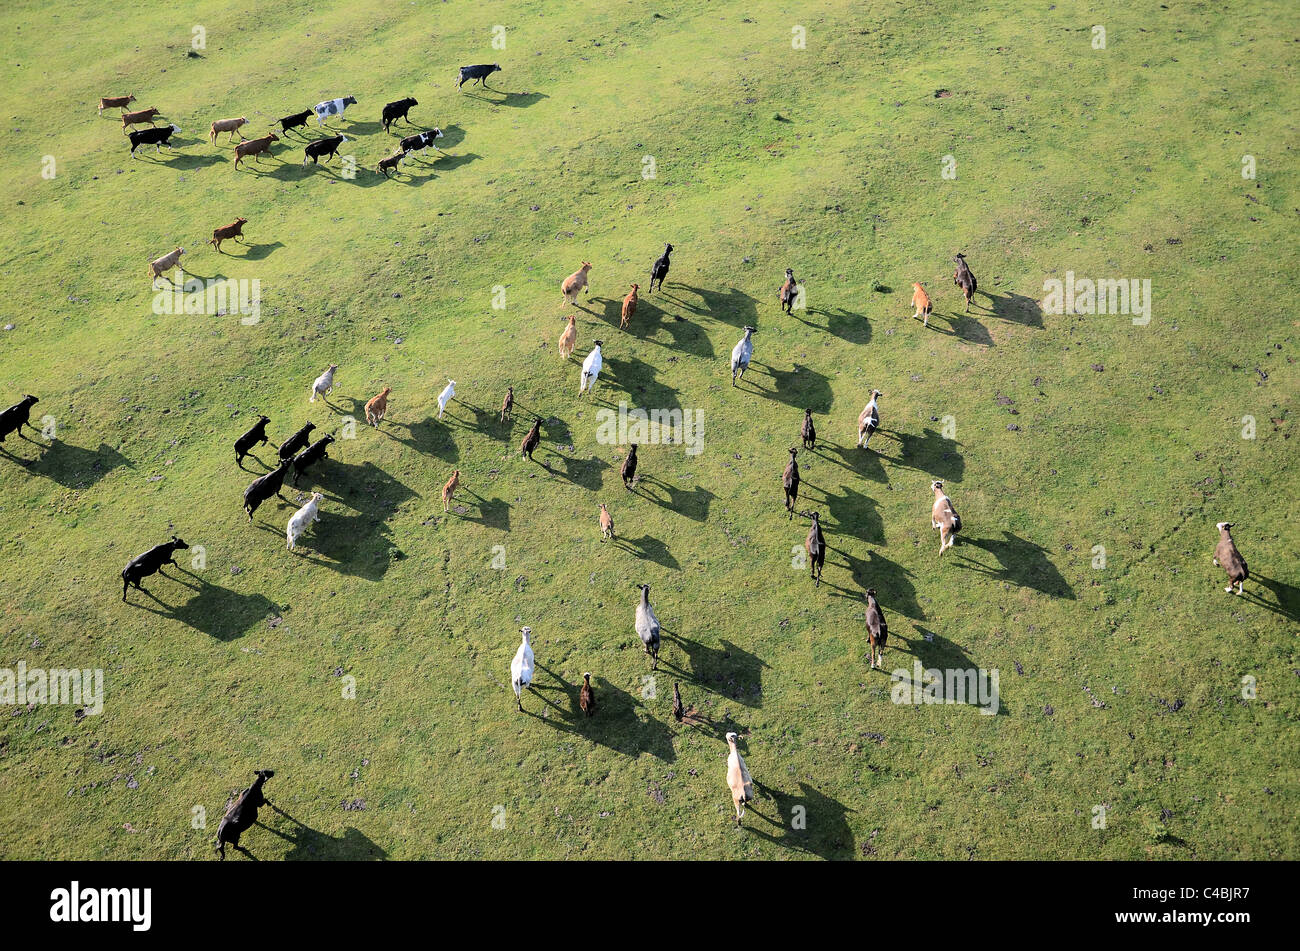 Aerial view of herd of cows with running from hot air balloon Stock Photo